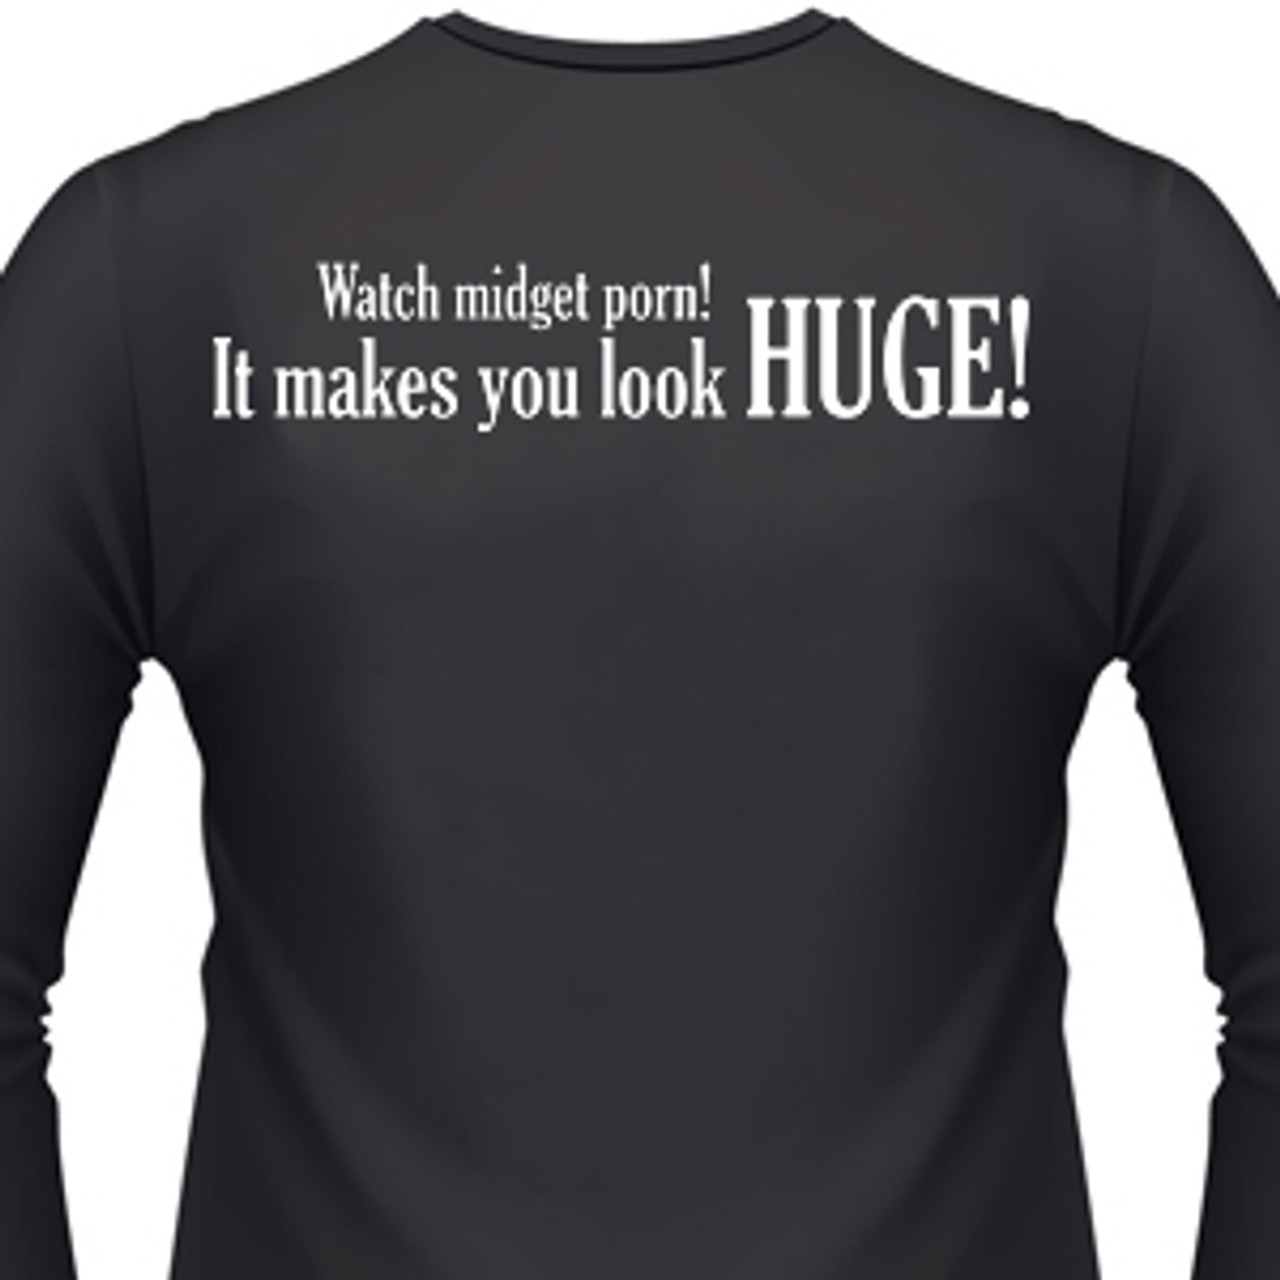 Watch Midget Porn! It You Look Huge! T-Shirt and shirts